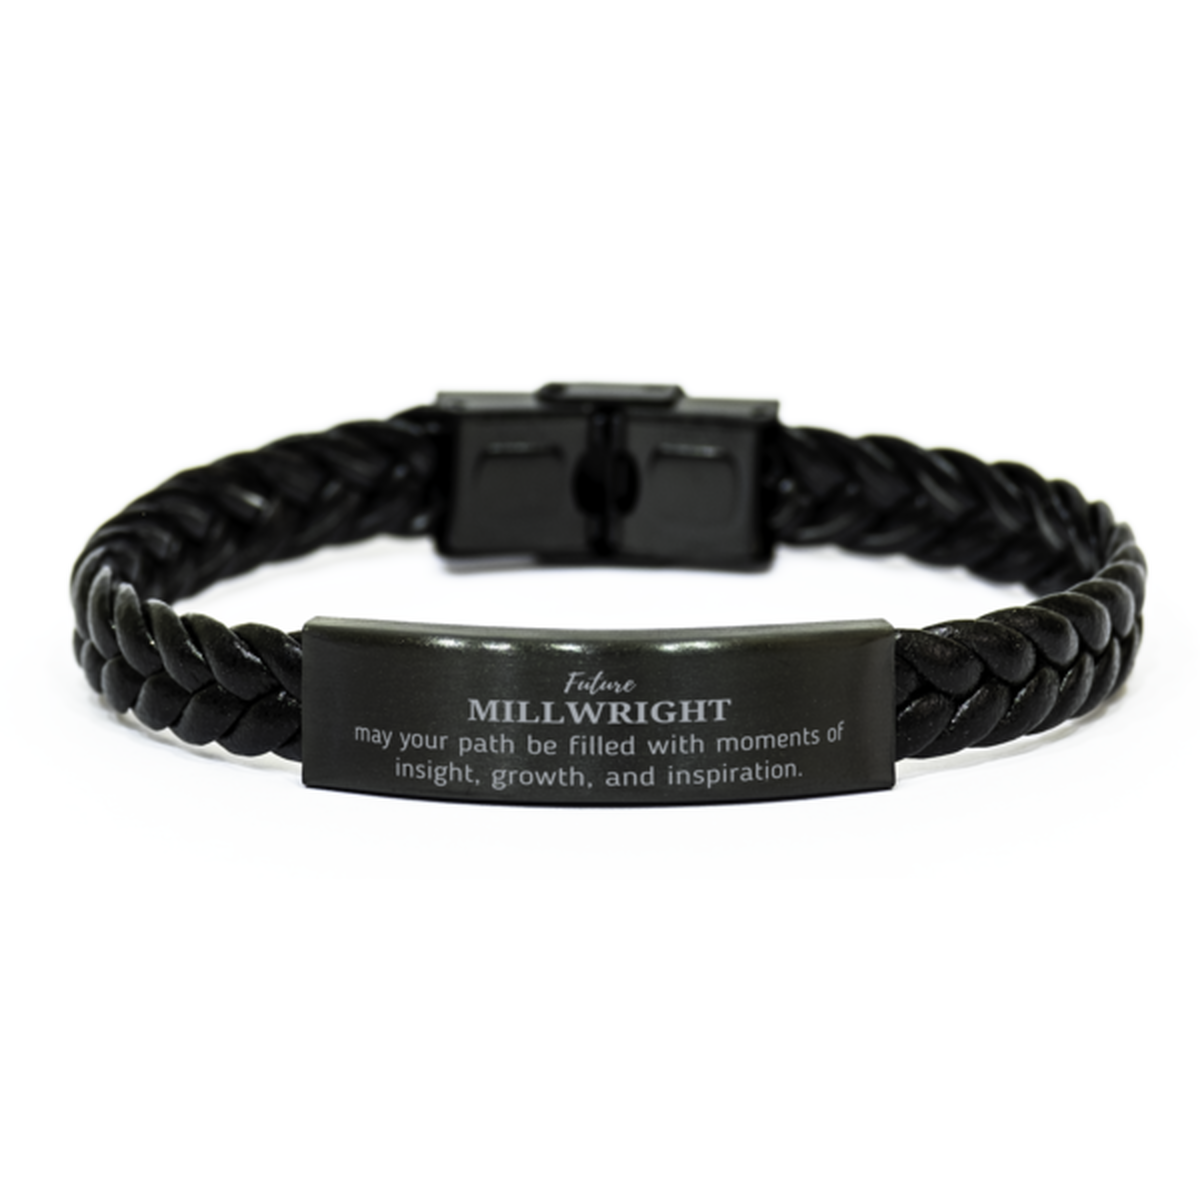 Future Millwright Gifts, May your path be filled with moments of insight, Graduation Gifts for New Millwright, Christmas Unique Braided Leather Bracelet For Men, Women, Friends